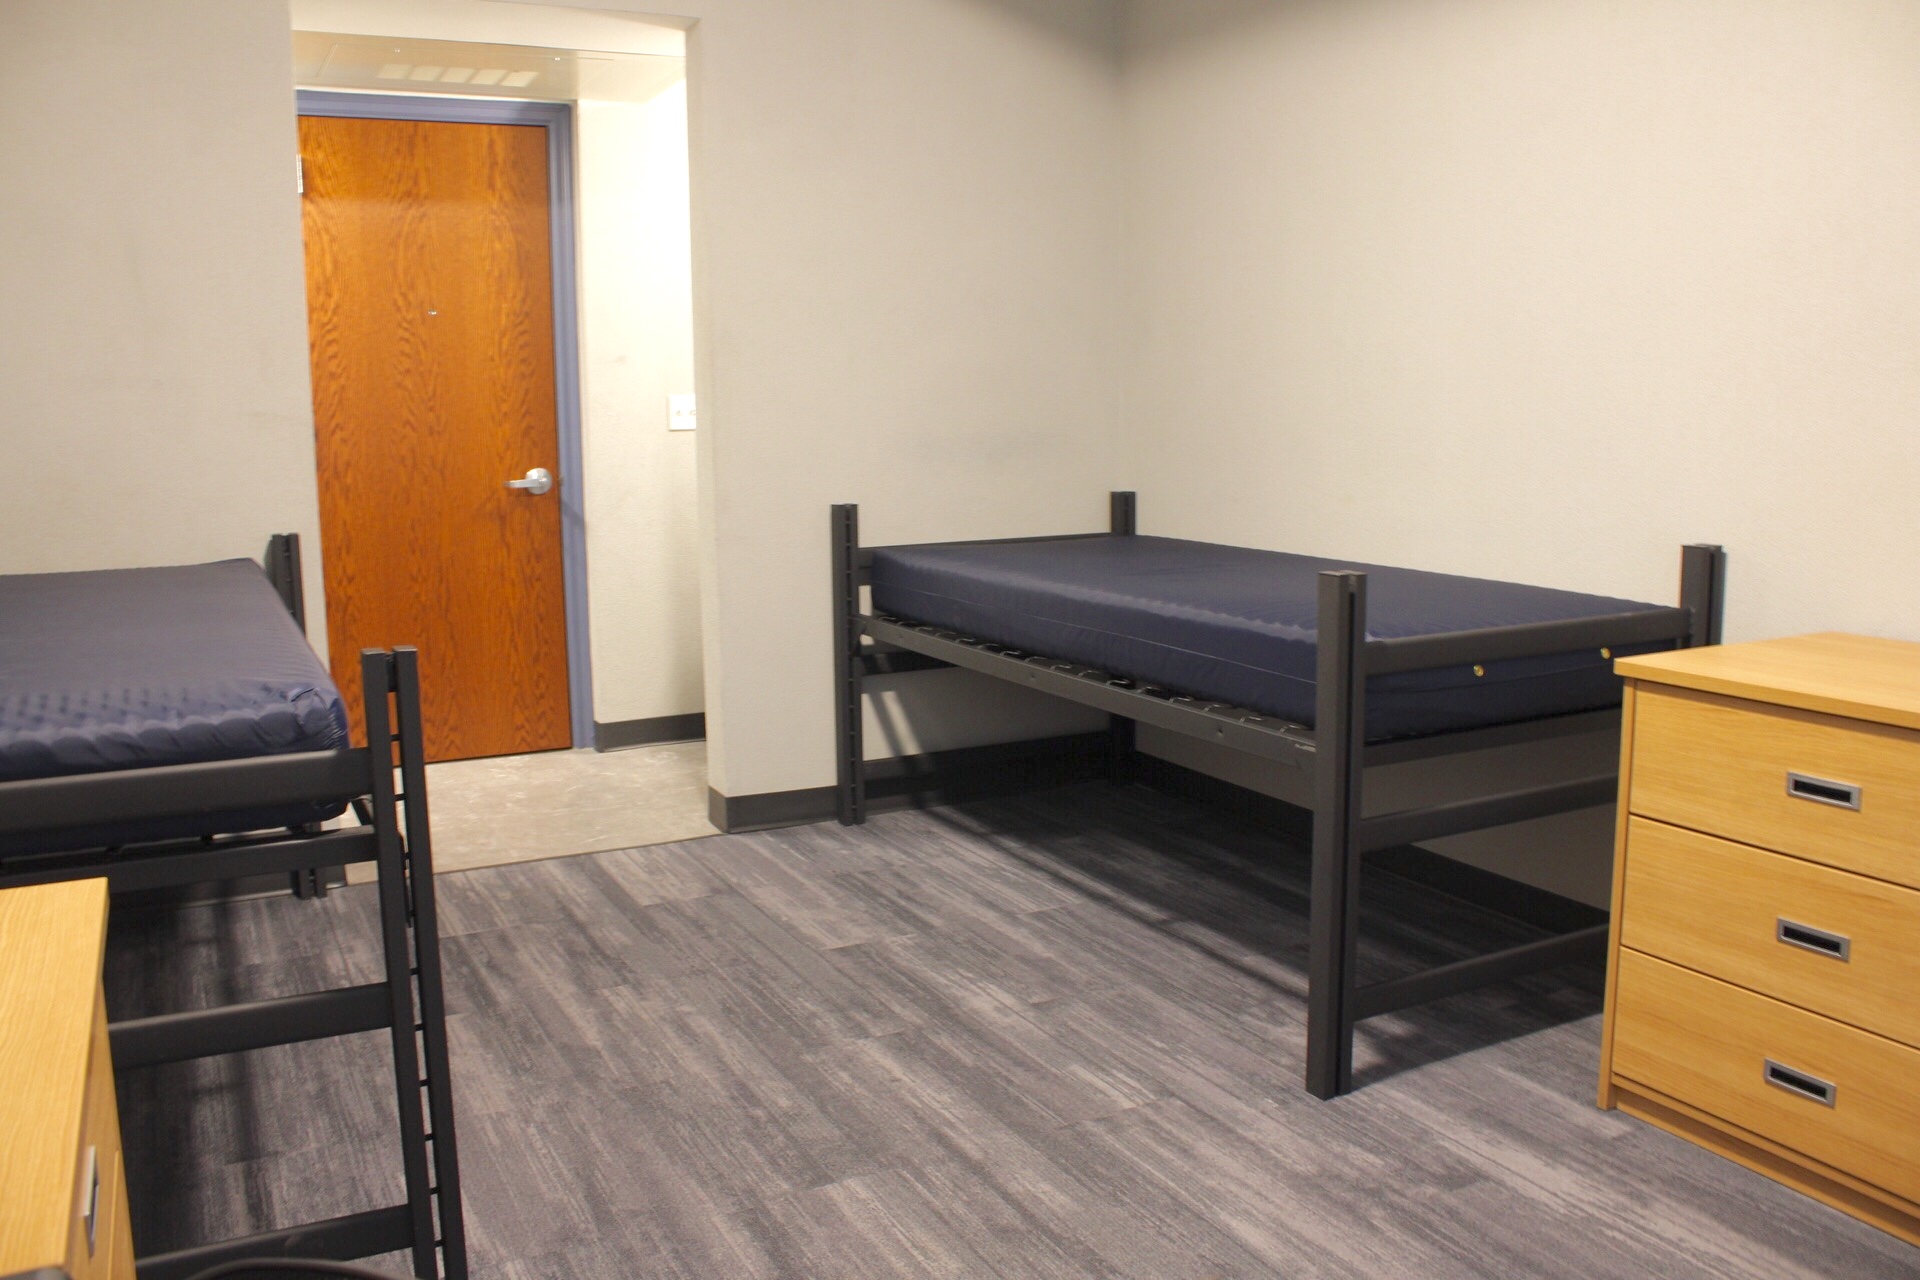 Delzell Hall room showing 2 bed frames, mattresses and dressers.